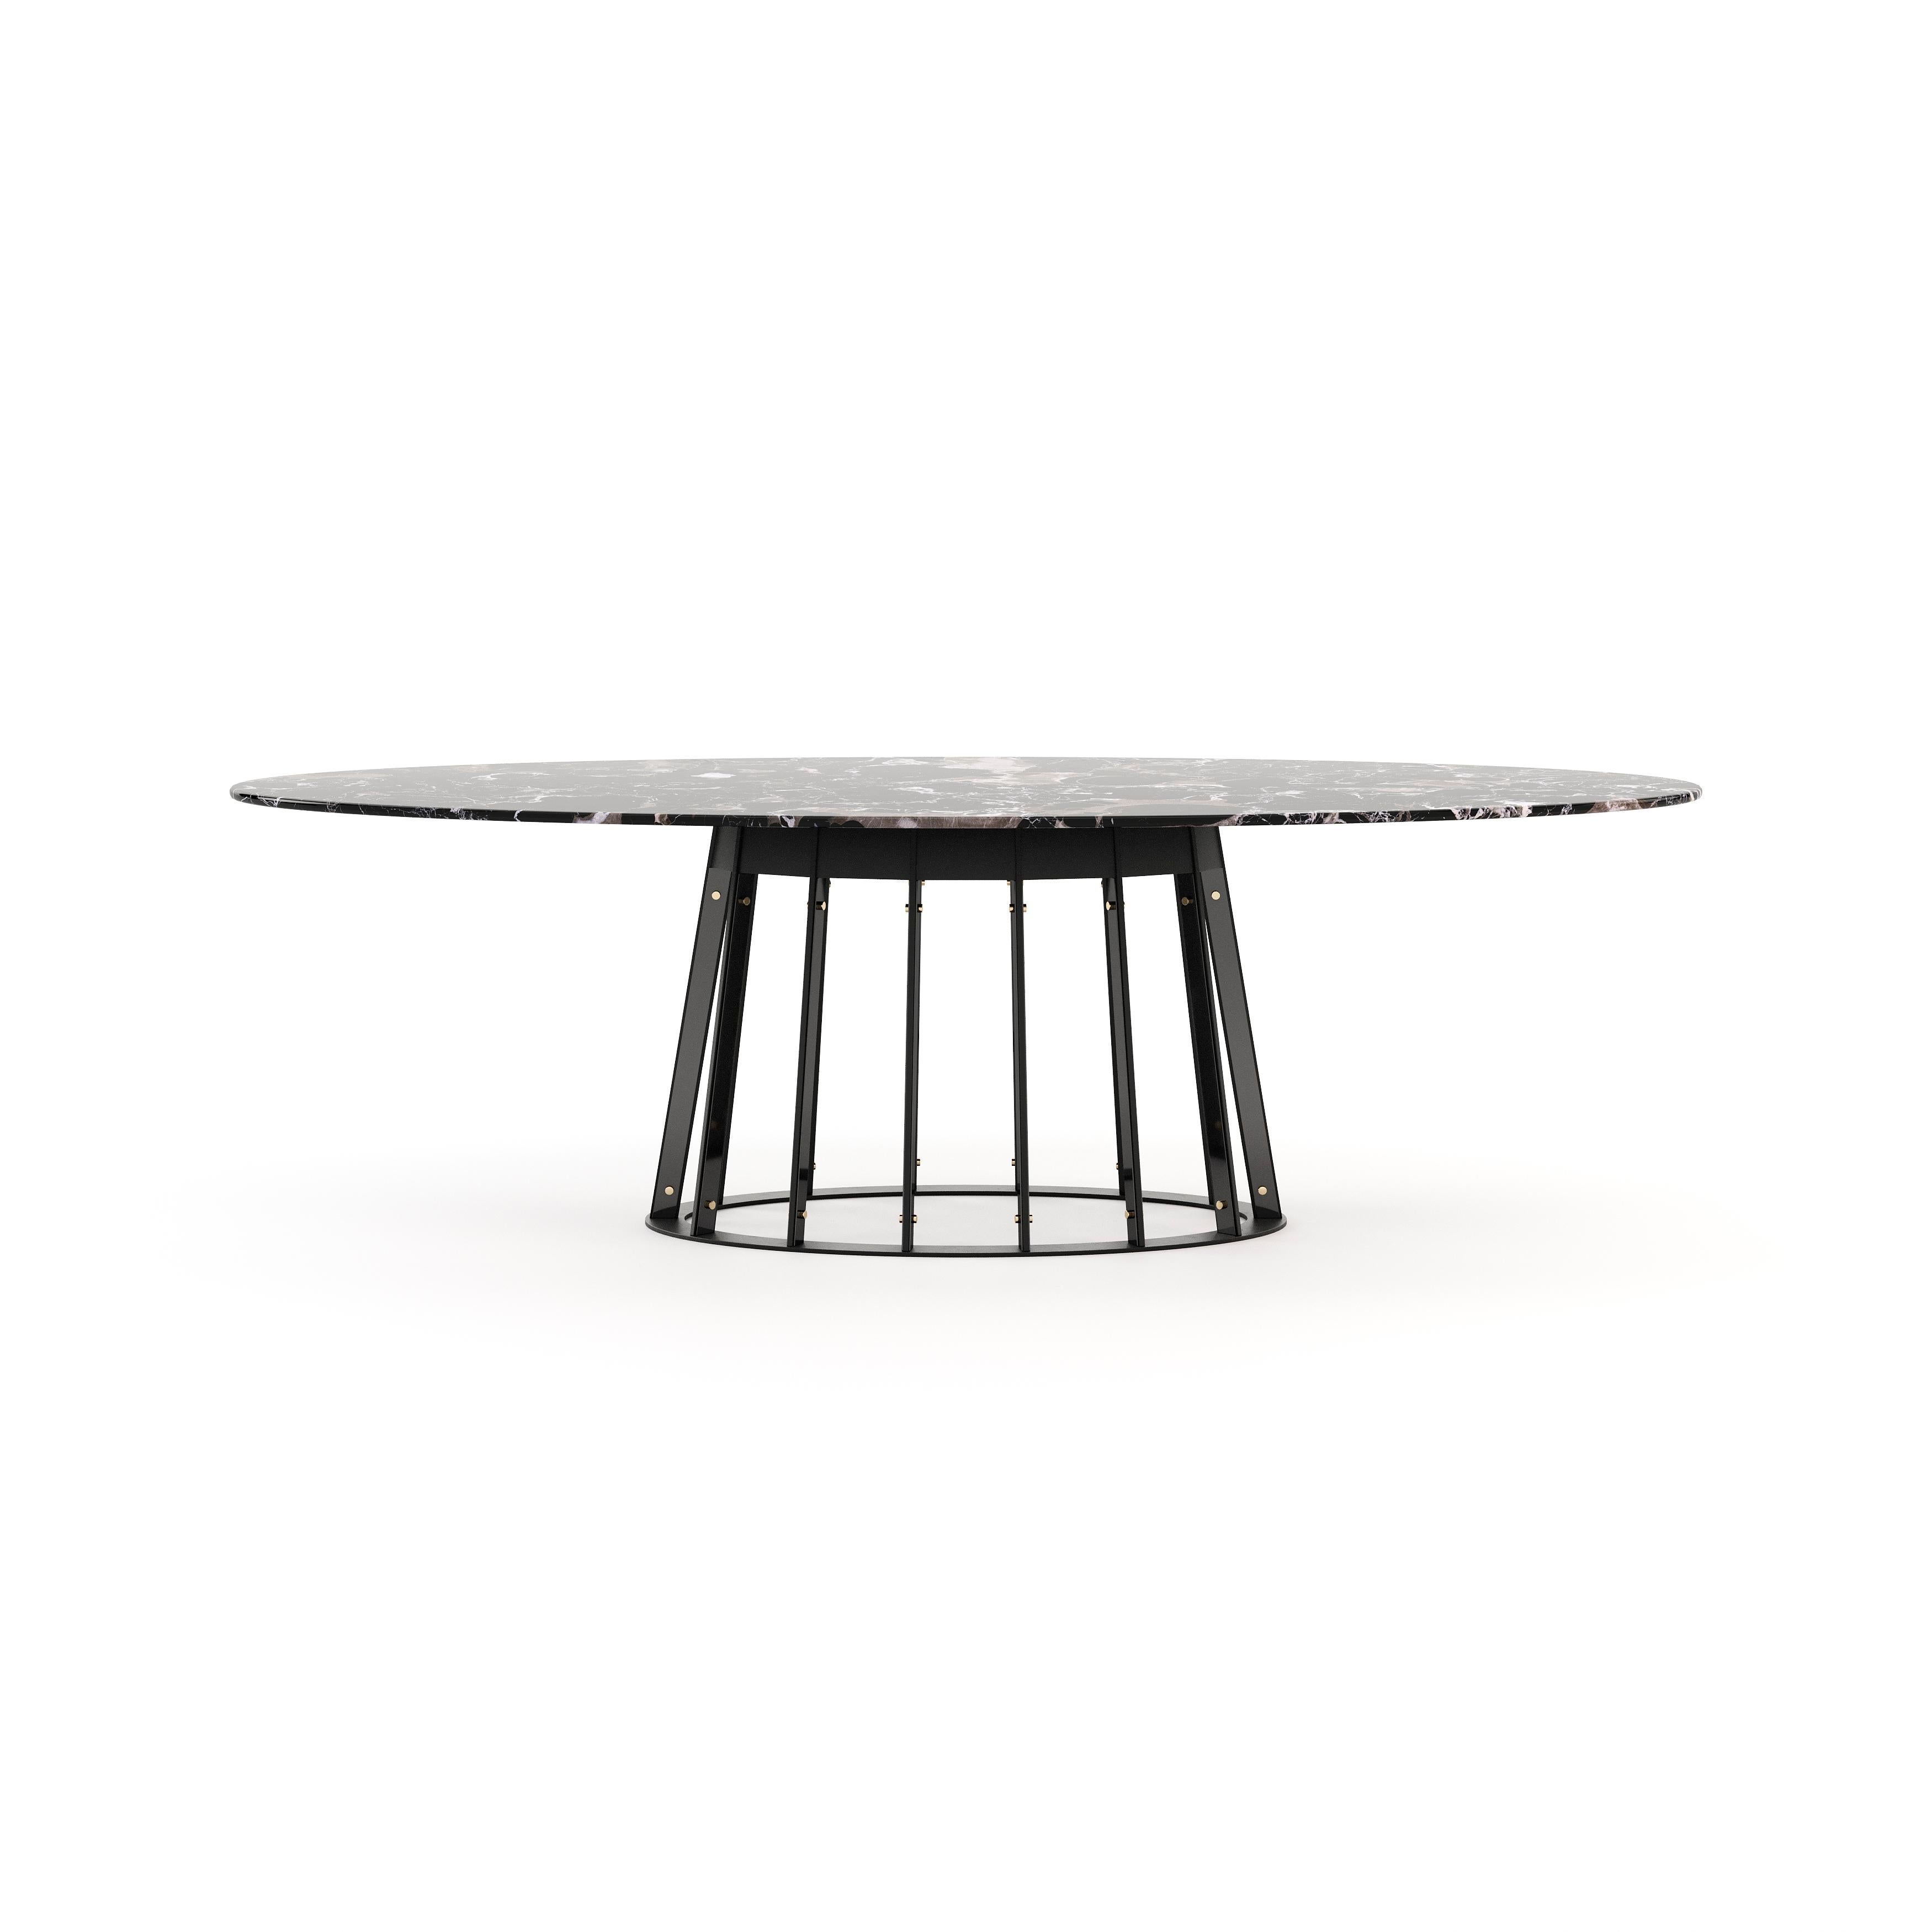 Ann dining table is a glamorous piece for dramatic spaces. The cylindrical-shaped base adds a refined twist to this timeless table, contrasting with the oval countertop made of dark wood. Ann features a tubular conic structure produced by Laskasas